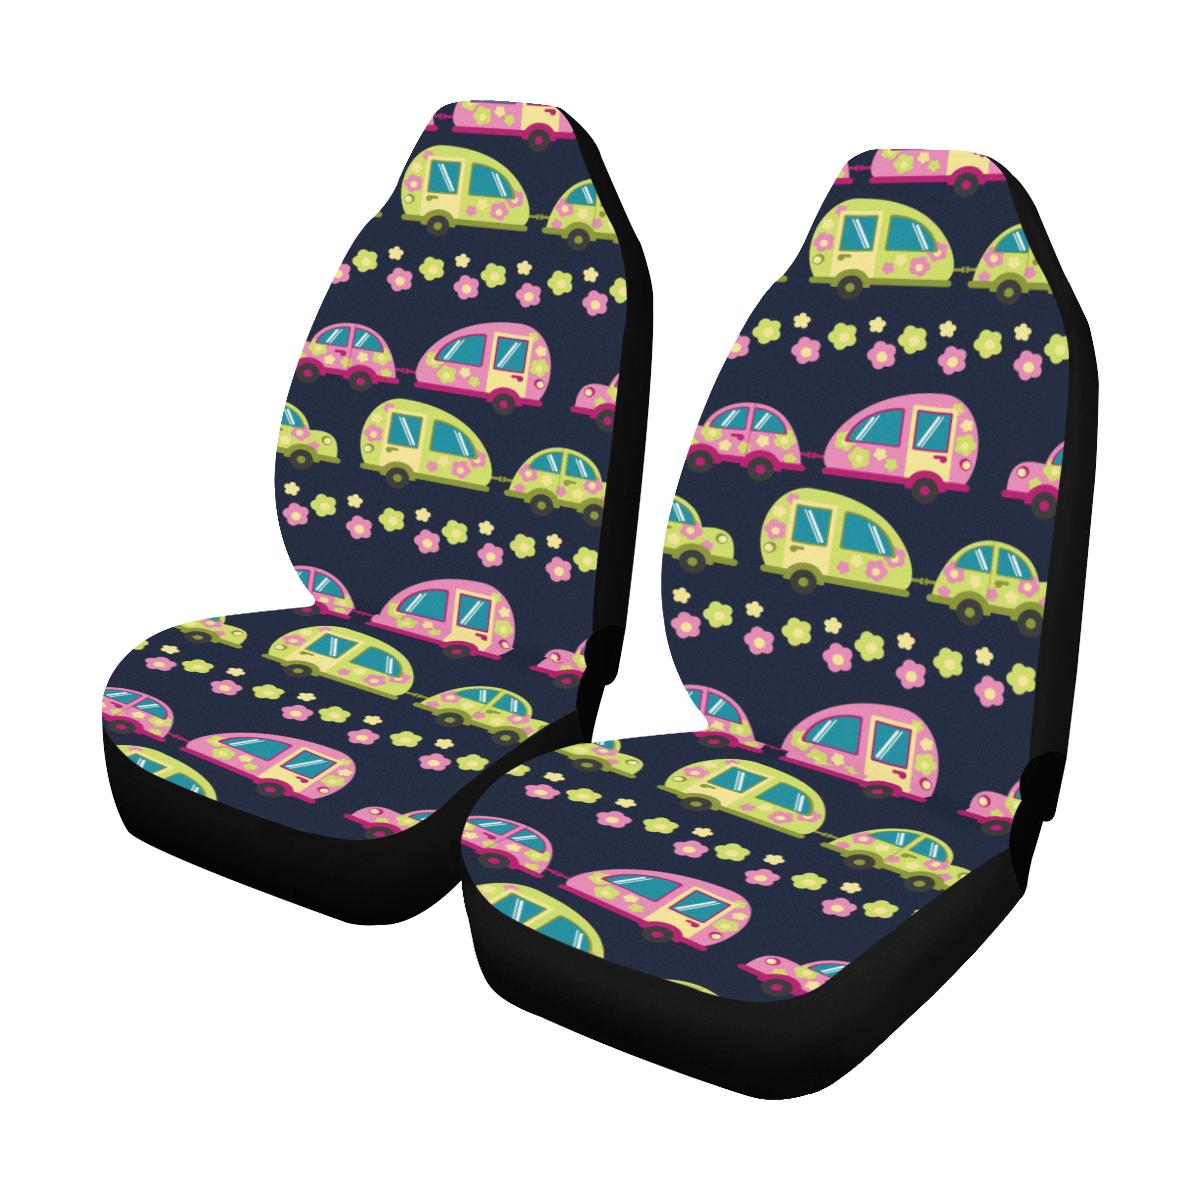 Cute Front Car Seat Cover For Camper/ Camping Seat Cover For A Car